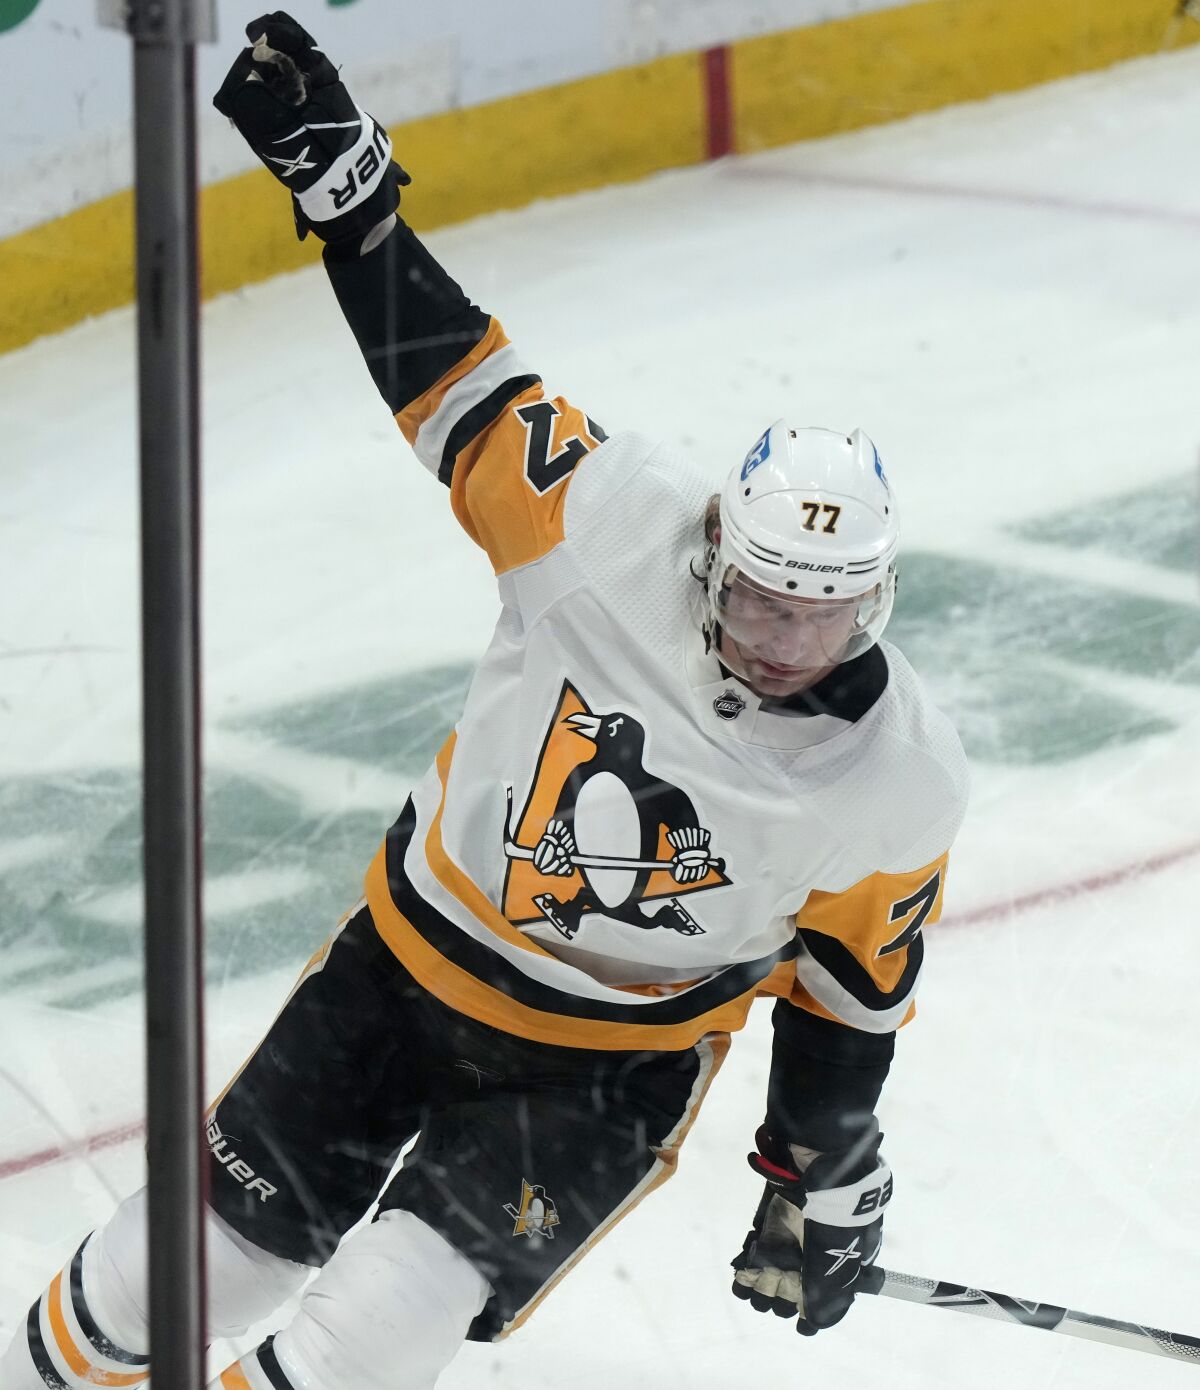 Pittsburgh Penguins center Jeff Carter celebrates his goal against the Ottawa Senators during second-period NHL hockey game action, Thursday, Feb. 10, 2022, in Ottawa, Ontario. (Adrian Wyld/The Canadian Press via AP)